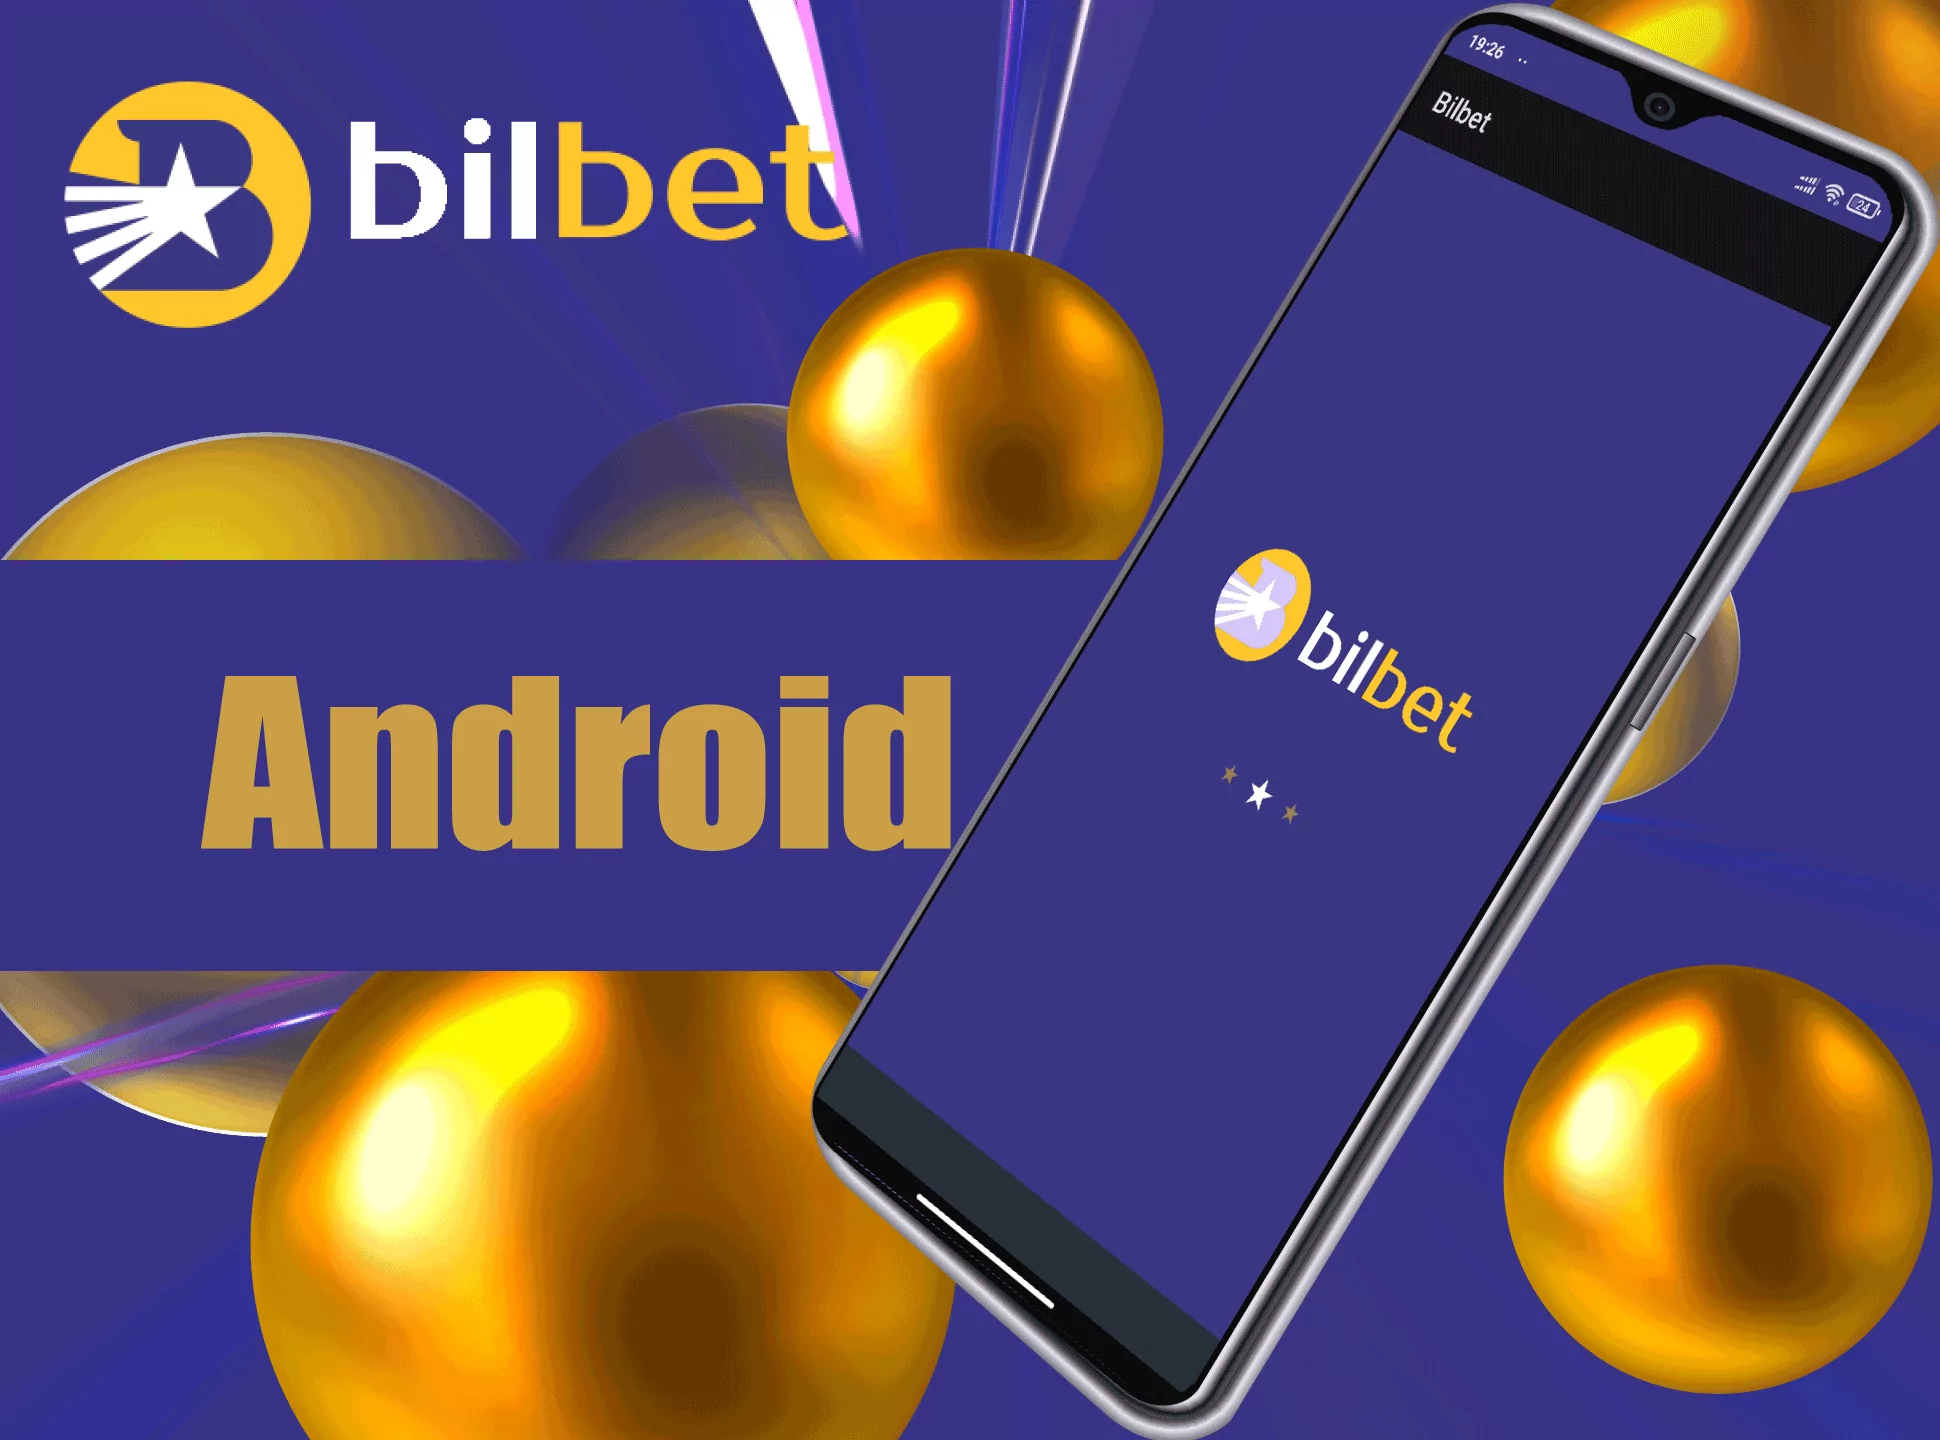 Proceed with the installation process the Bilbet Apk.